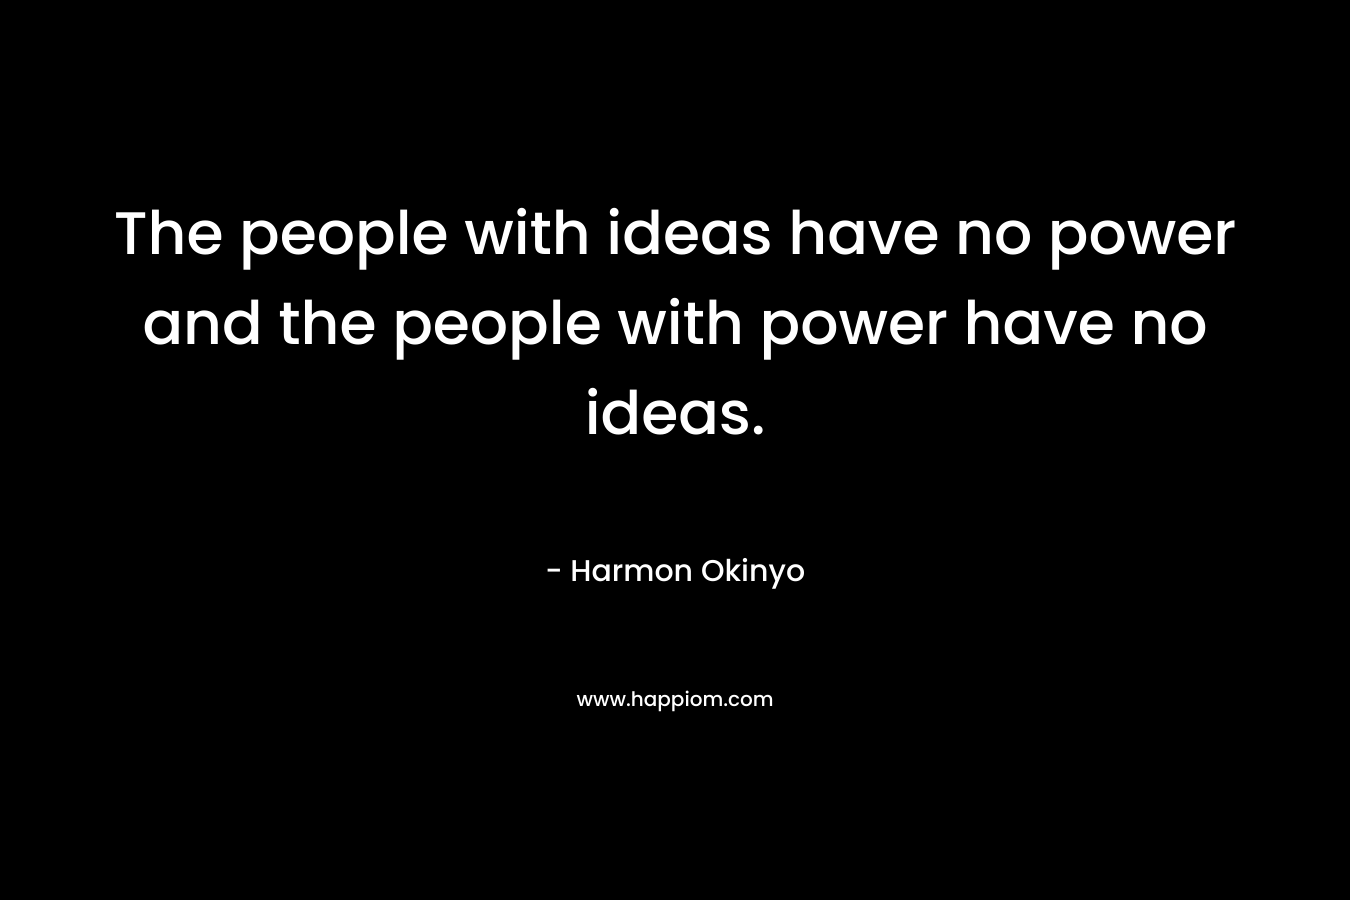 The people with ideas have no power and the people with power have no ideas.